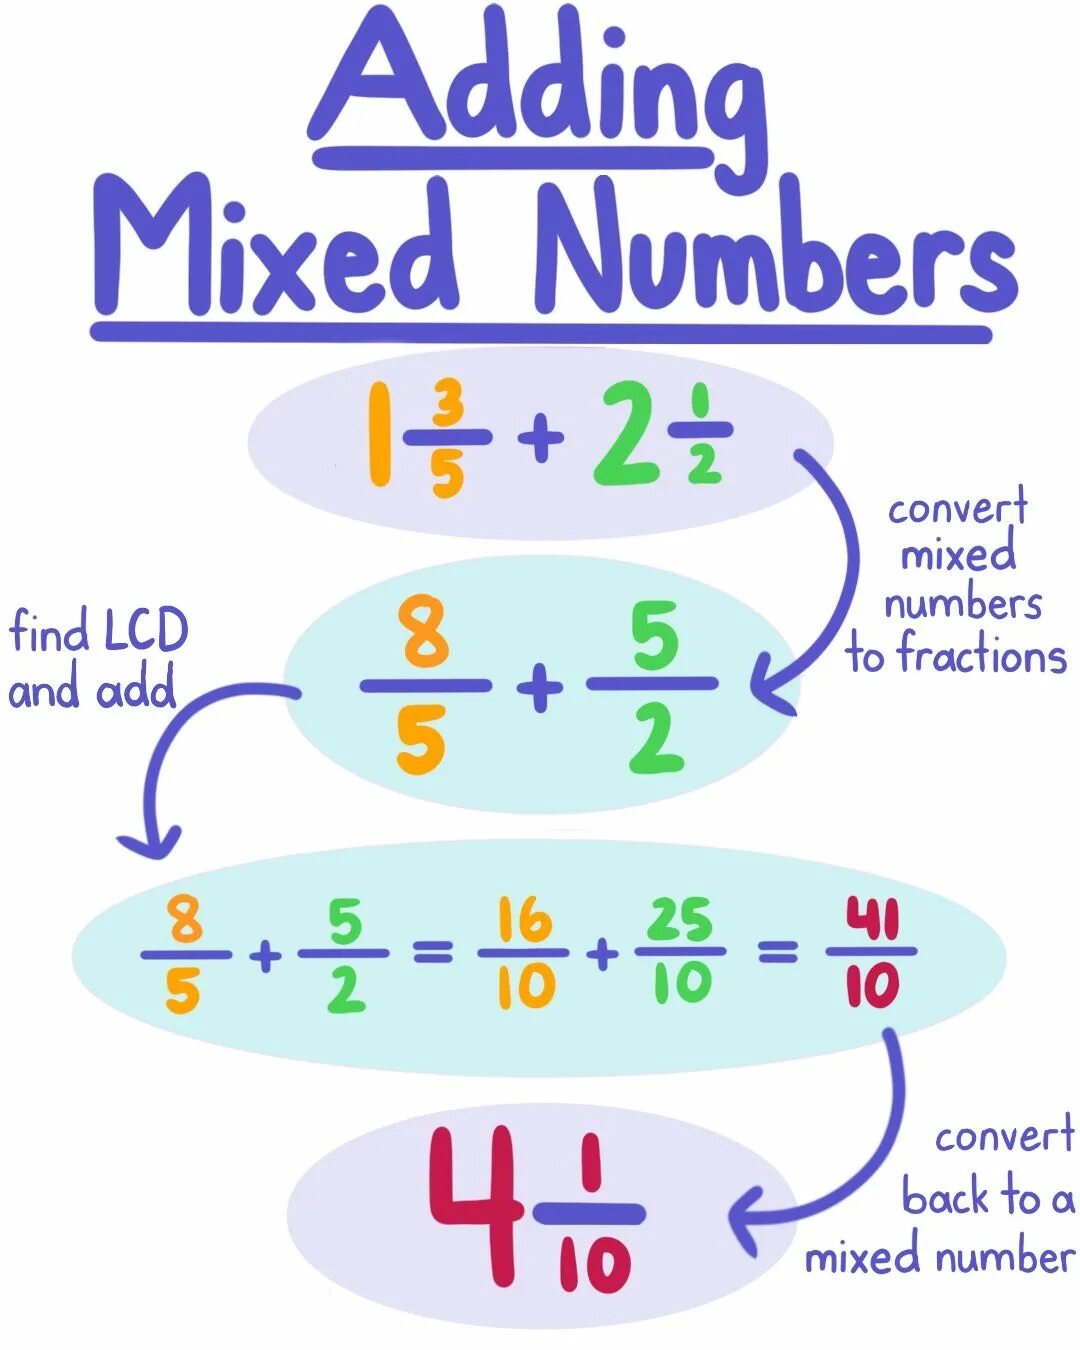 Adding. Adding Mixed numbers. Mixed fractions. Subtracting Mixed numbers. Adding Mixed fractions.